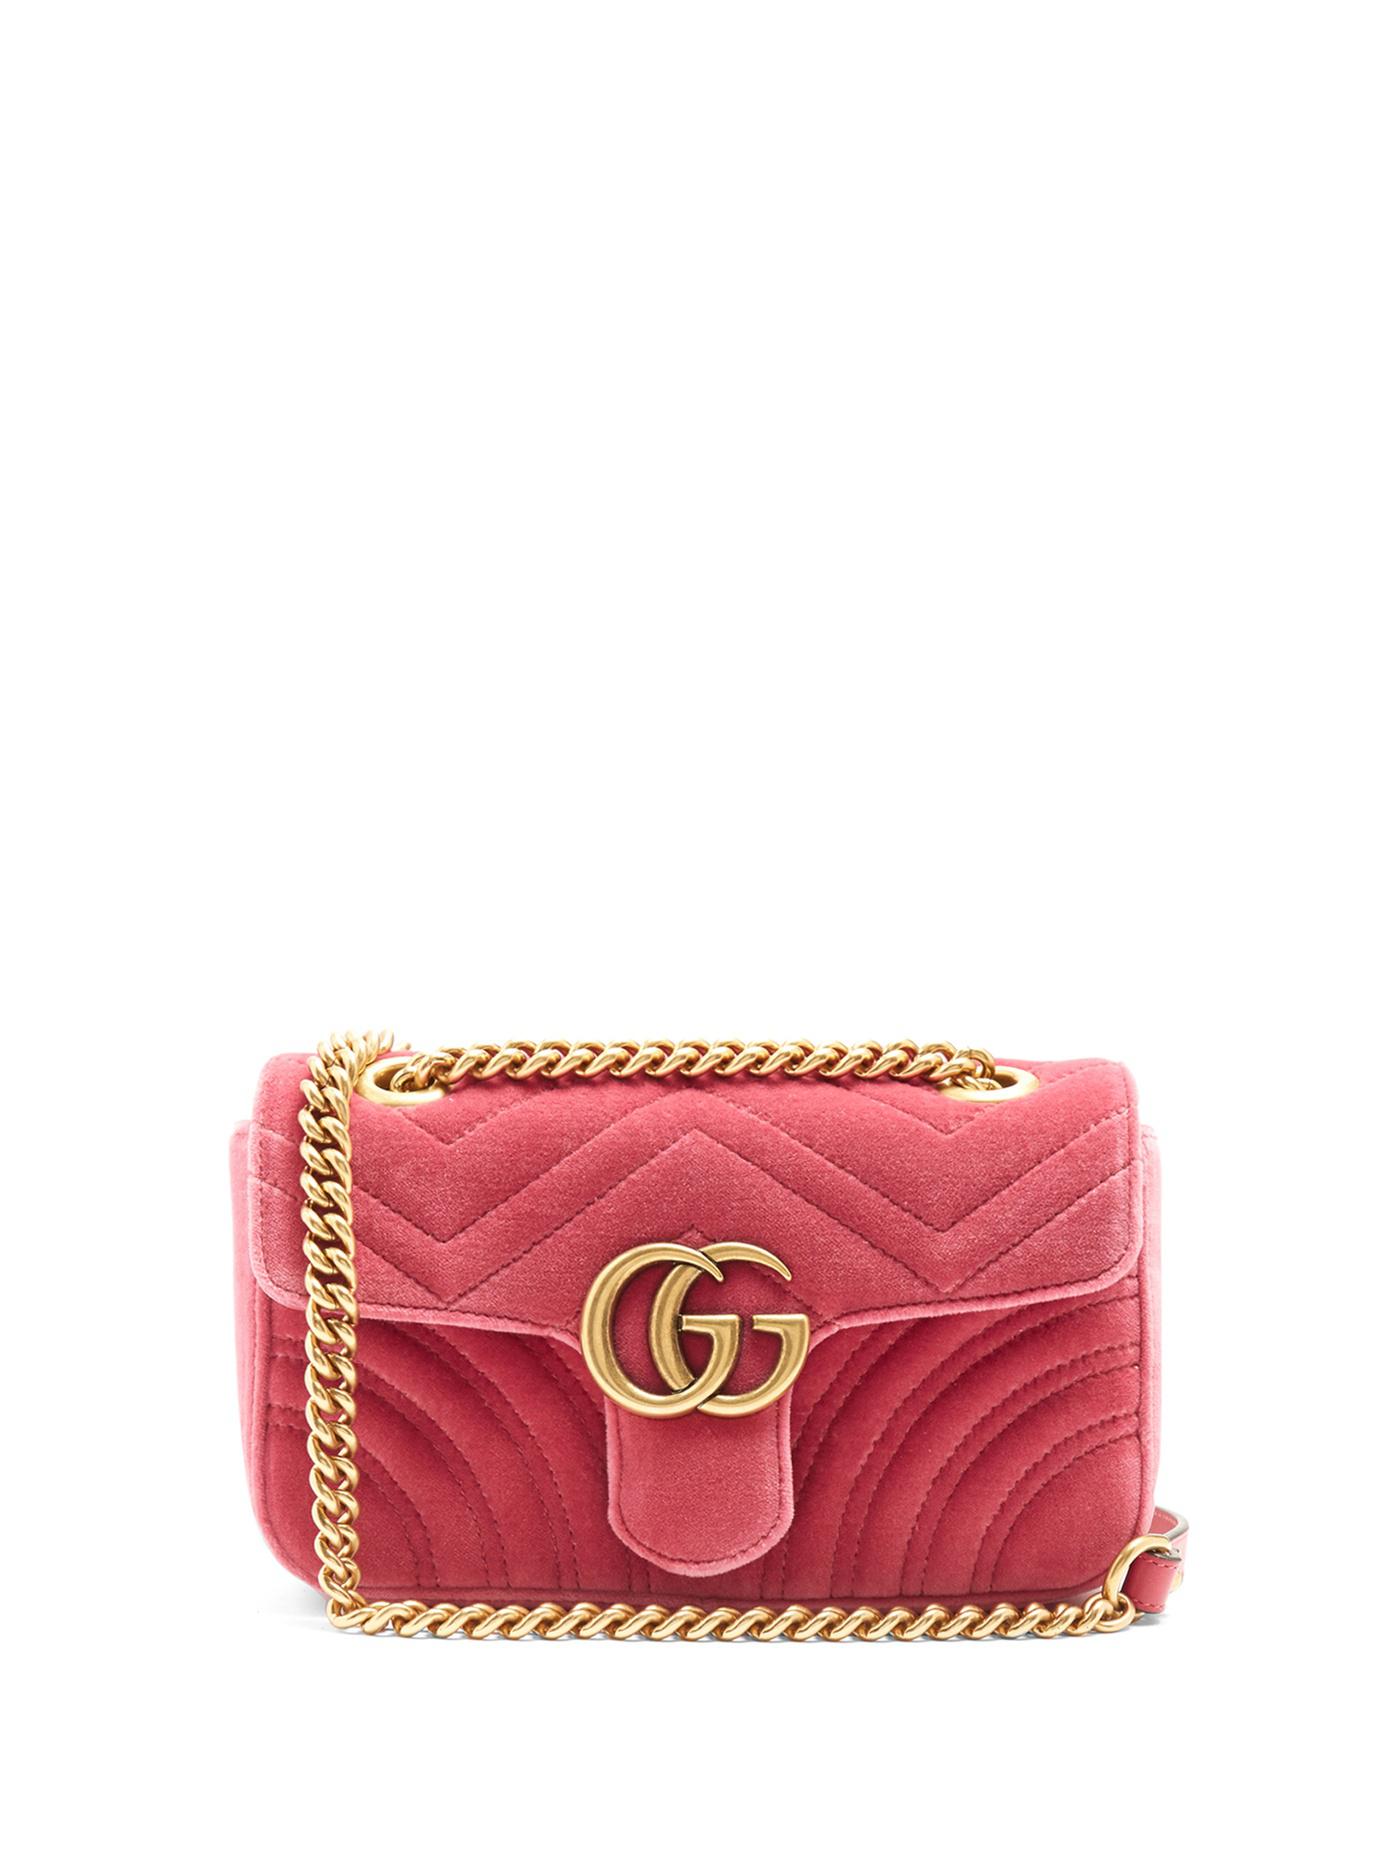 Lyst - Gucci Gg Marmont Mini Quilted-velvet Cross-body Bag in Pink